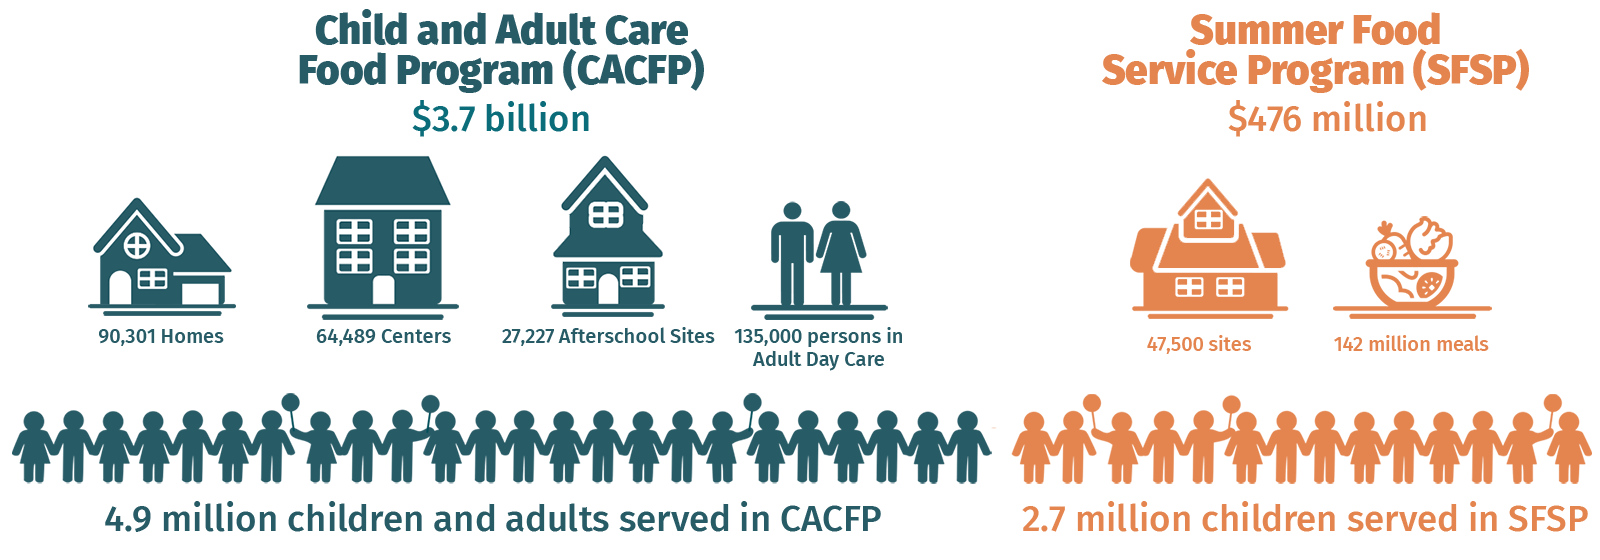 CACFP SFSP Infographic with adults